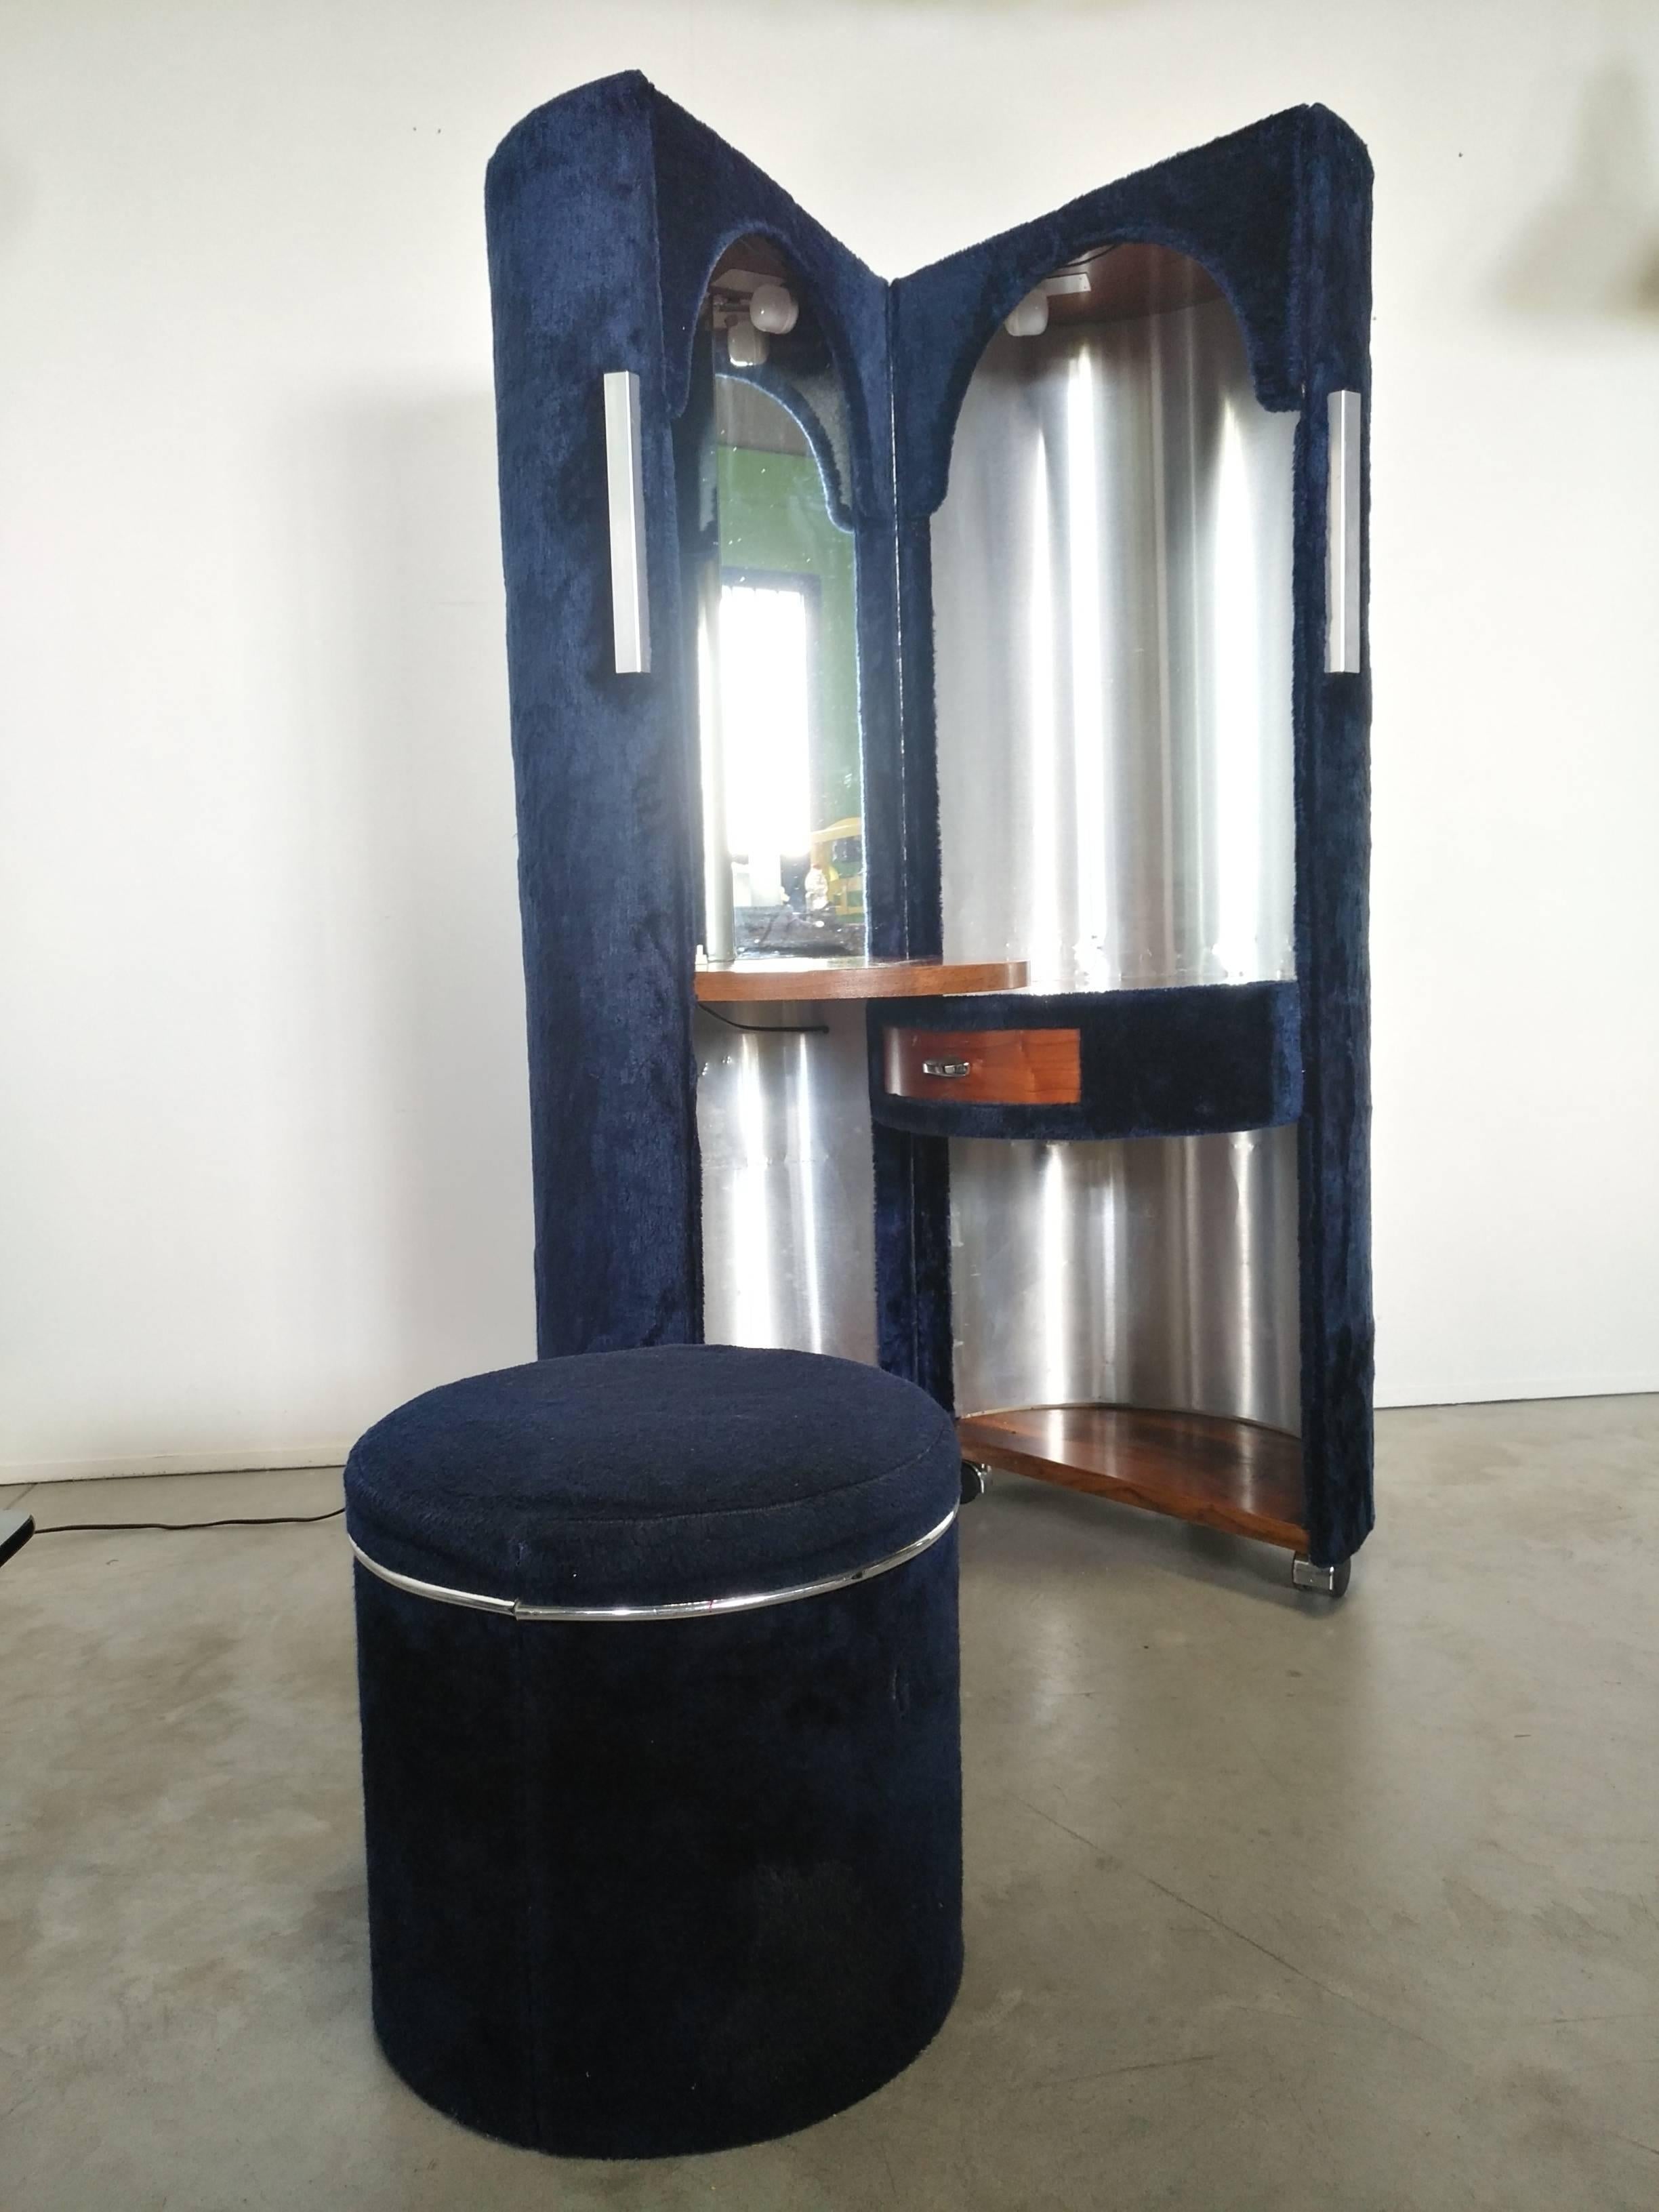 Beautiful openable and swivel room toilet with pouf seat, covered by blue synthetic fur elegant and fashion, inside there are an illuminated mirror and an aluminum coating resting on wood shelfs with a drawers.
This very original object is